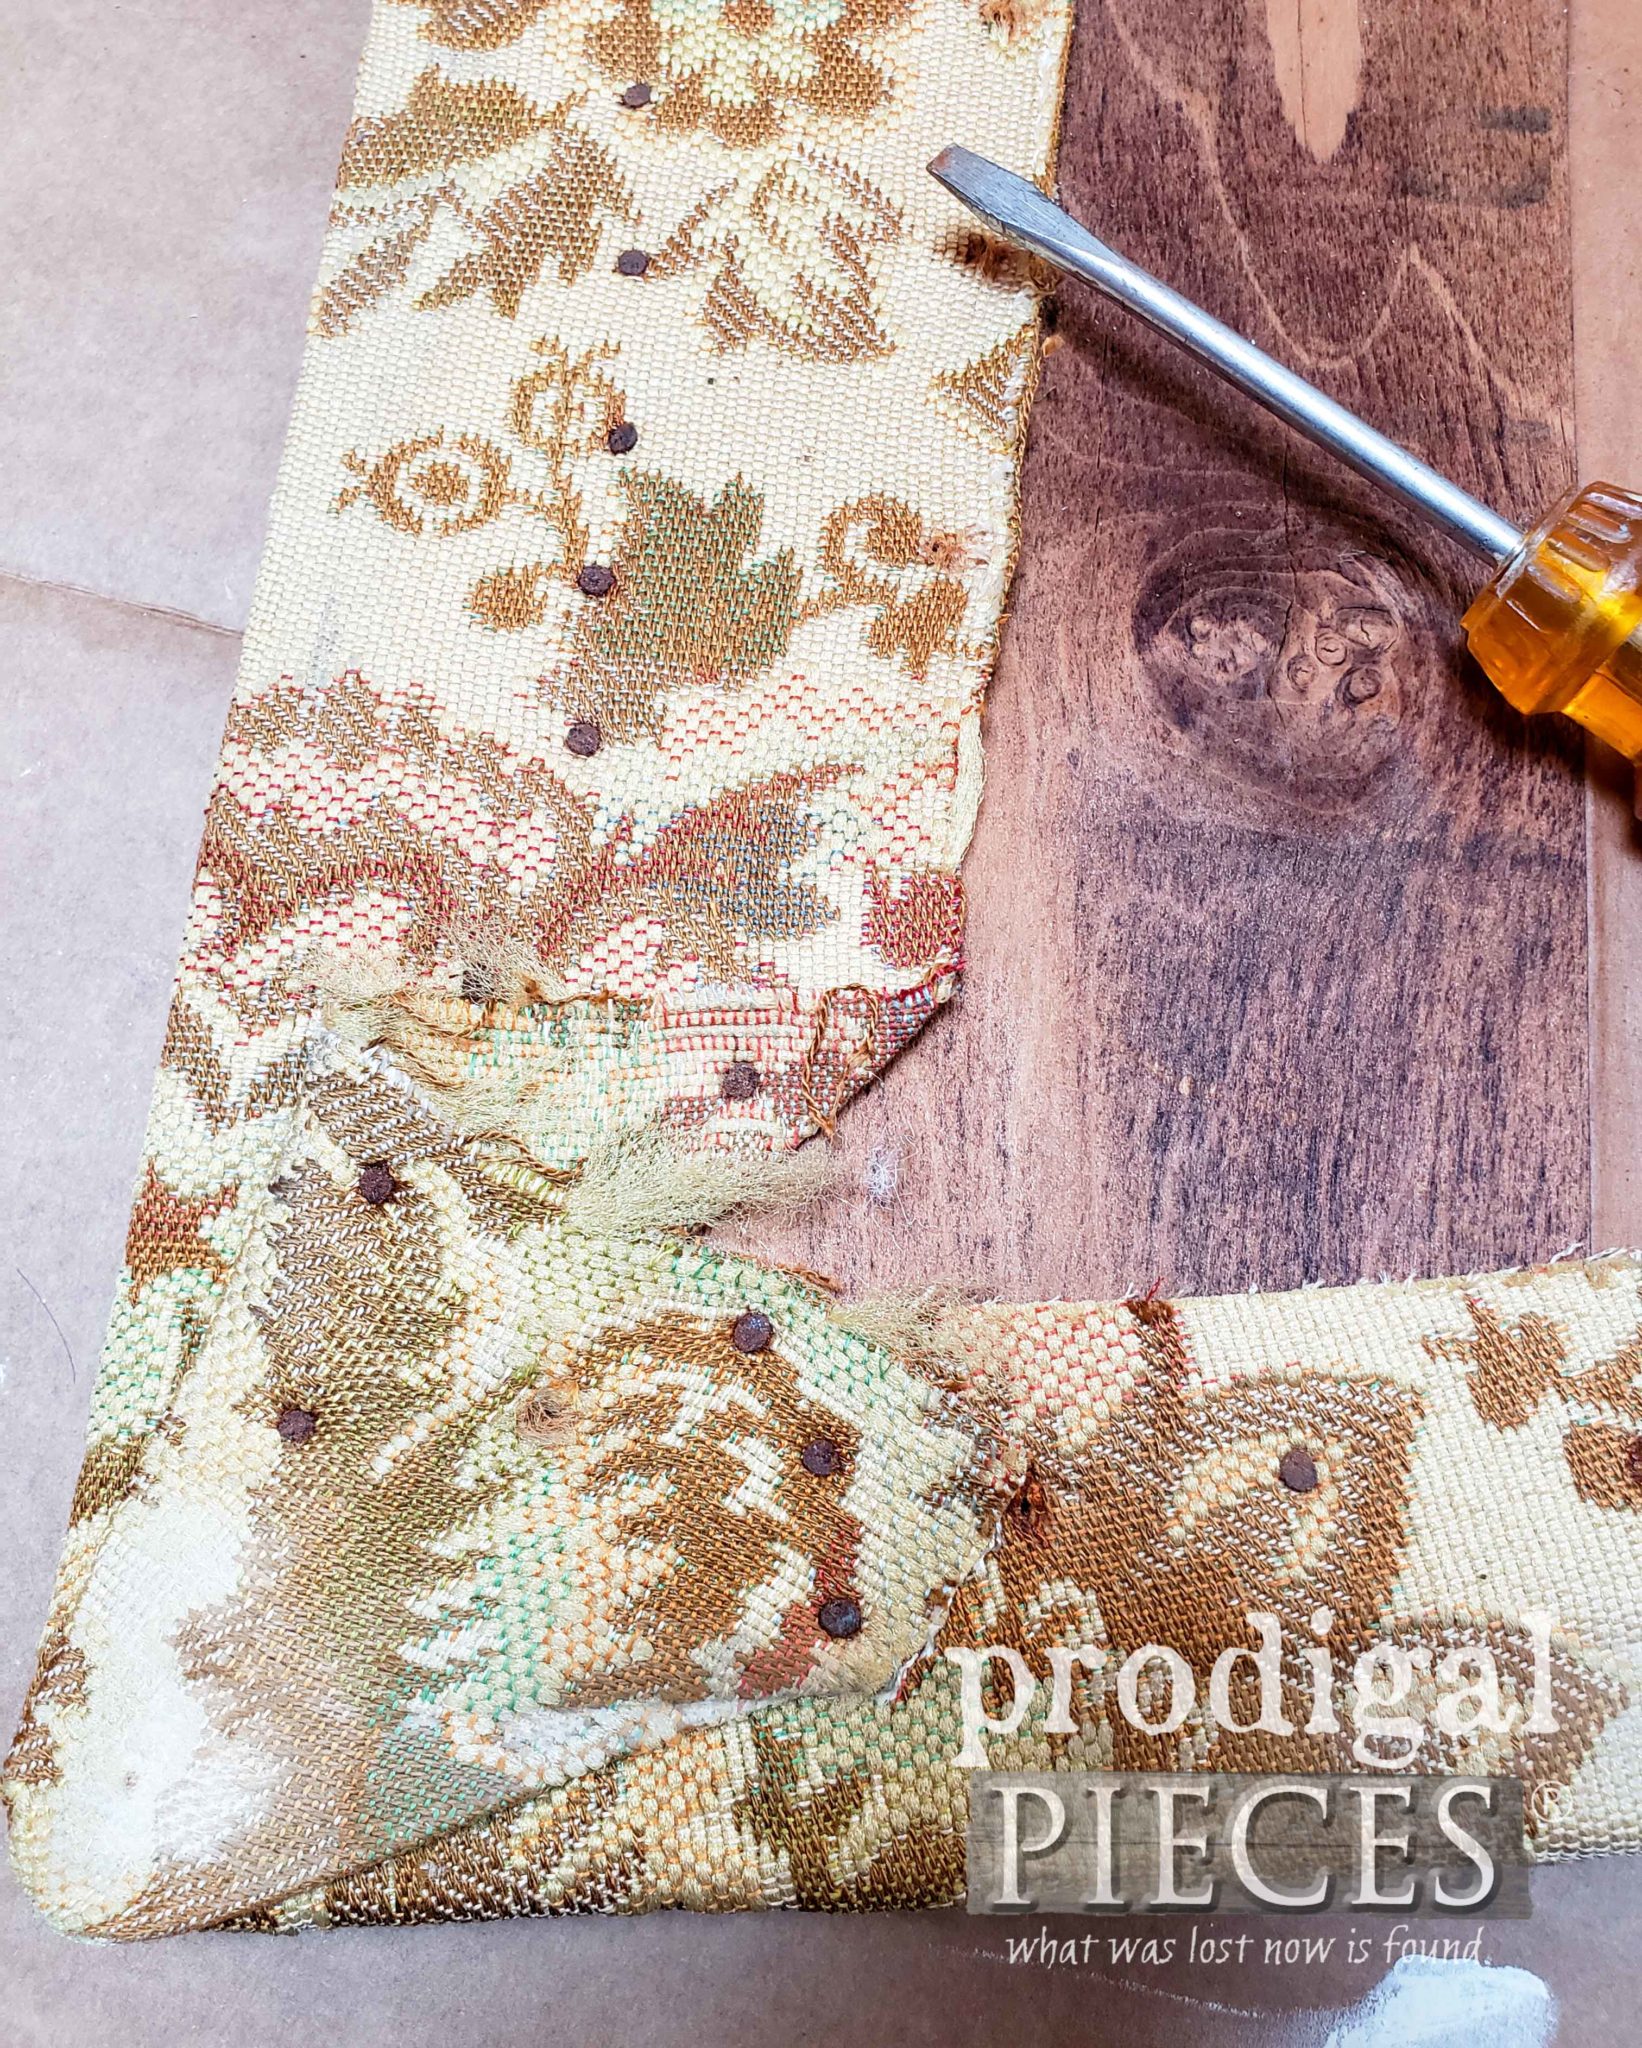 Original Upholstery on Vintage Shield Chair | prodigalpieces.com